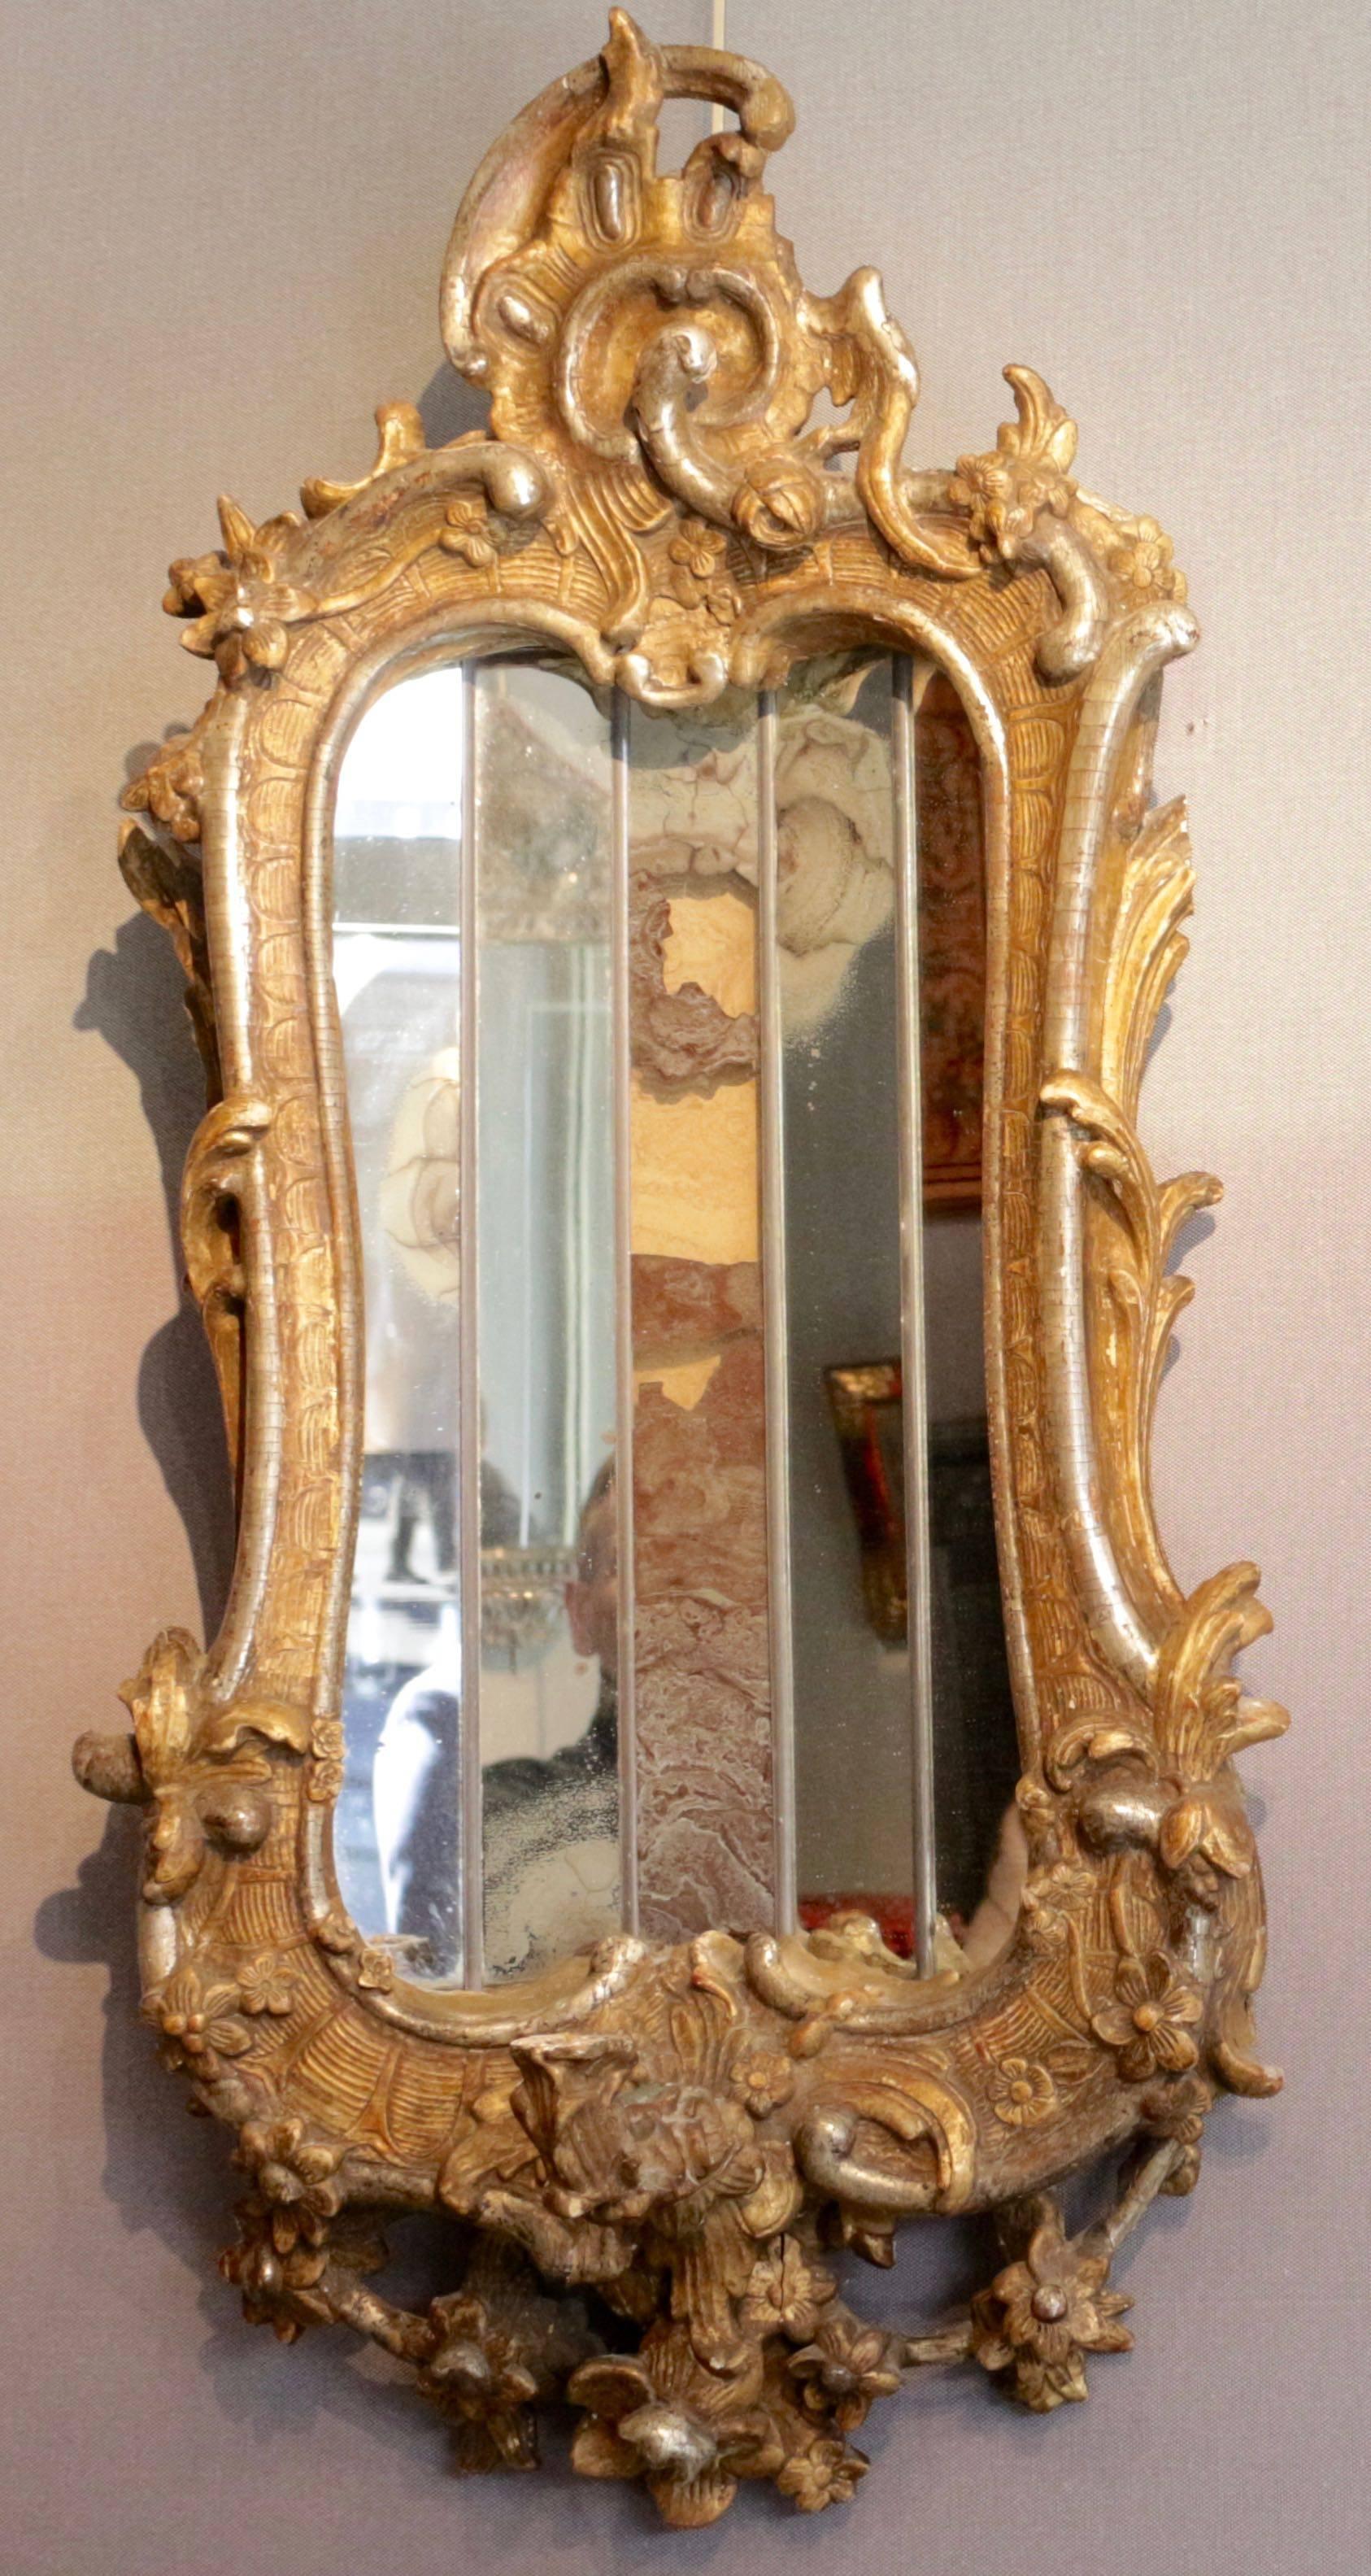 Rococo Fantastic Pair of Italian Mirrors, Giltwood and Silvered Wood, 18th Century